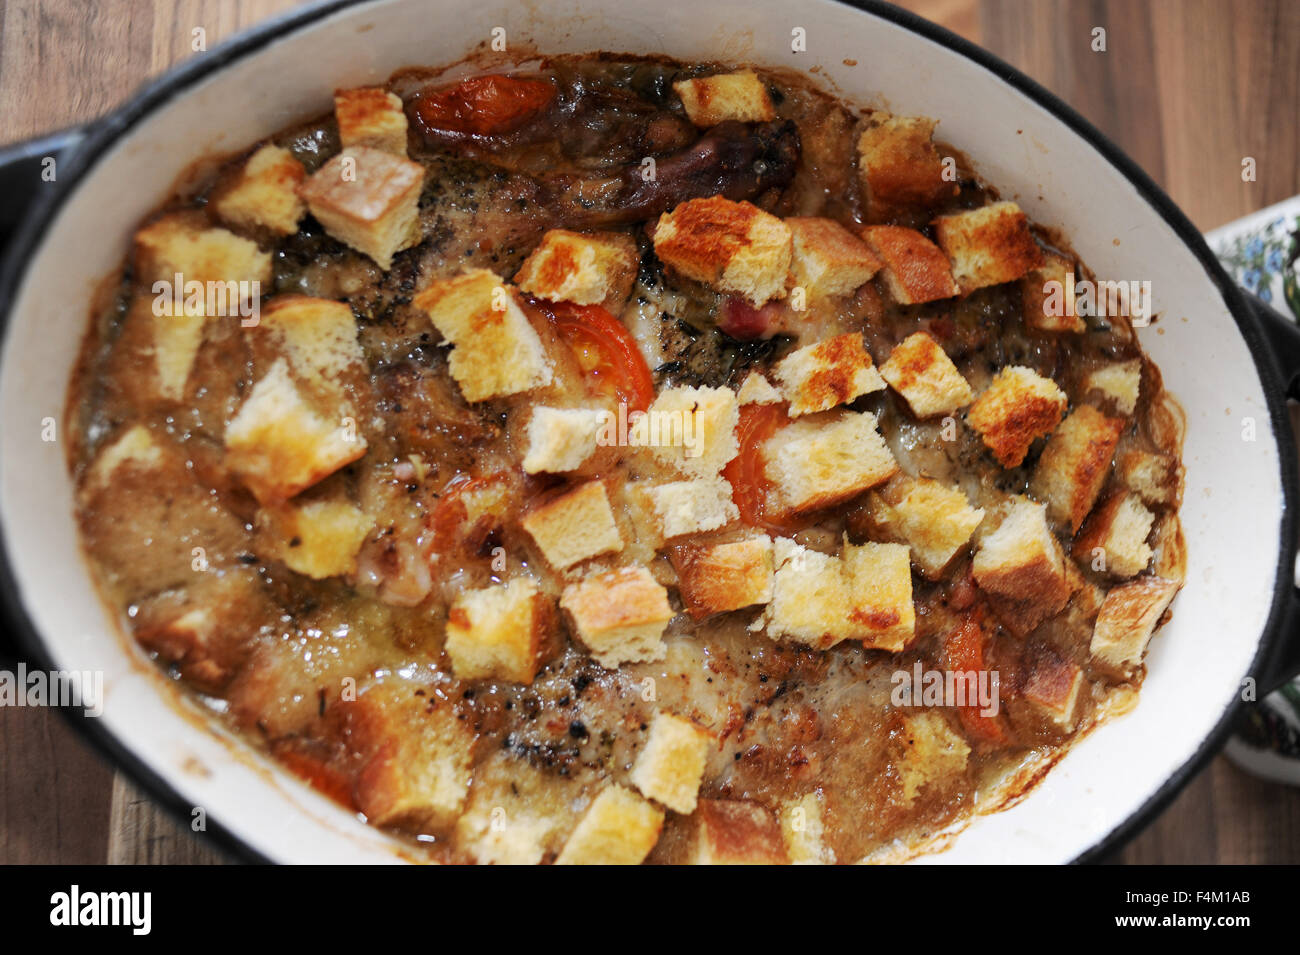 Well known French dish from South West Region cassoulet made with Toulouse sausage duck legs white beans and bread crumbs on top Stock Photo